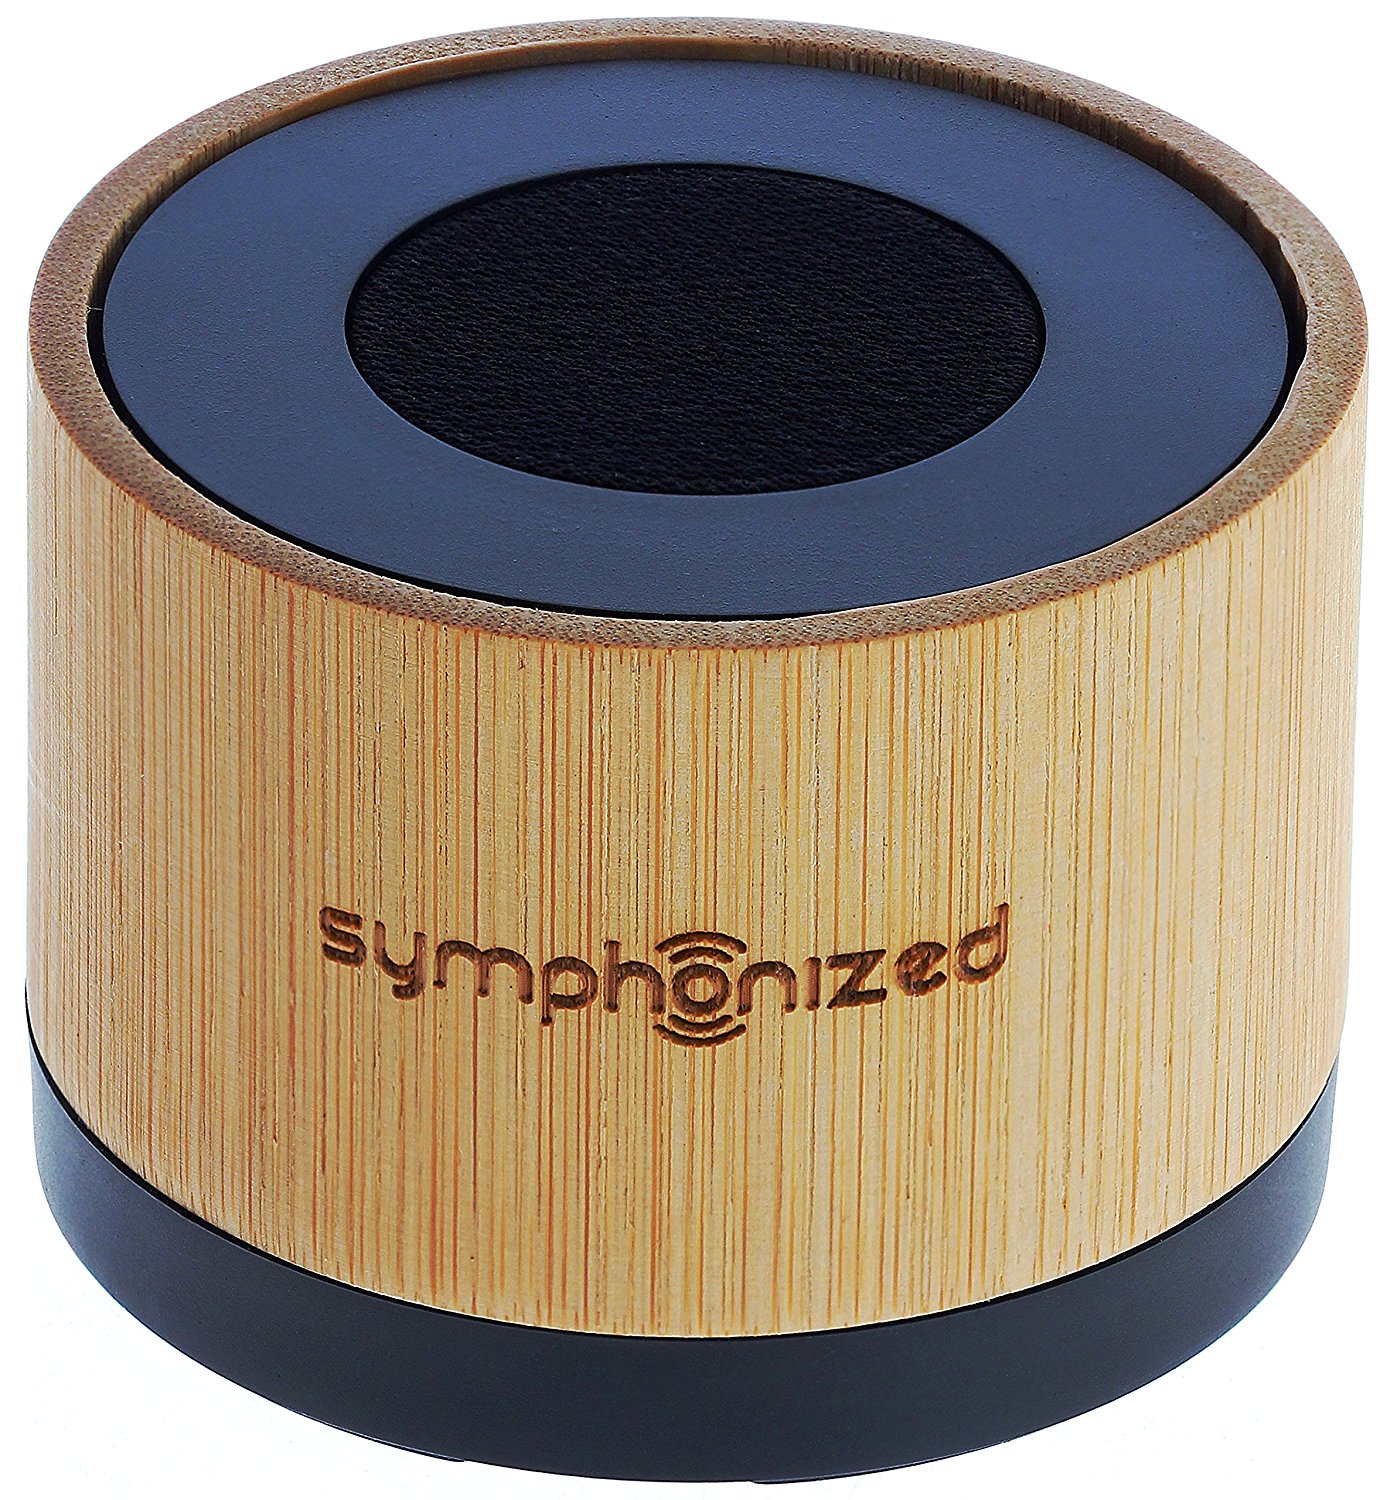 Symphonized NXT Bluetooth Speaker (Carved Bamboo Wood)